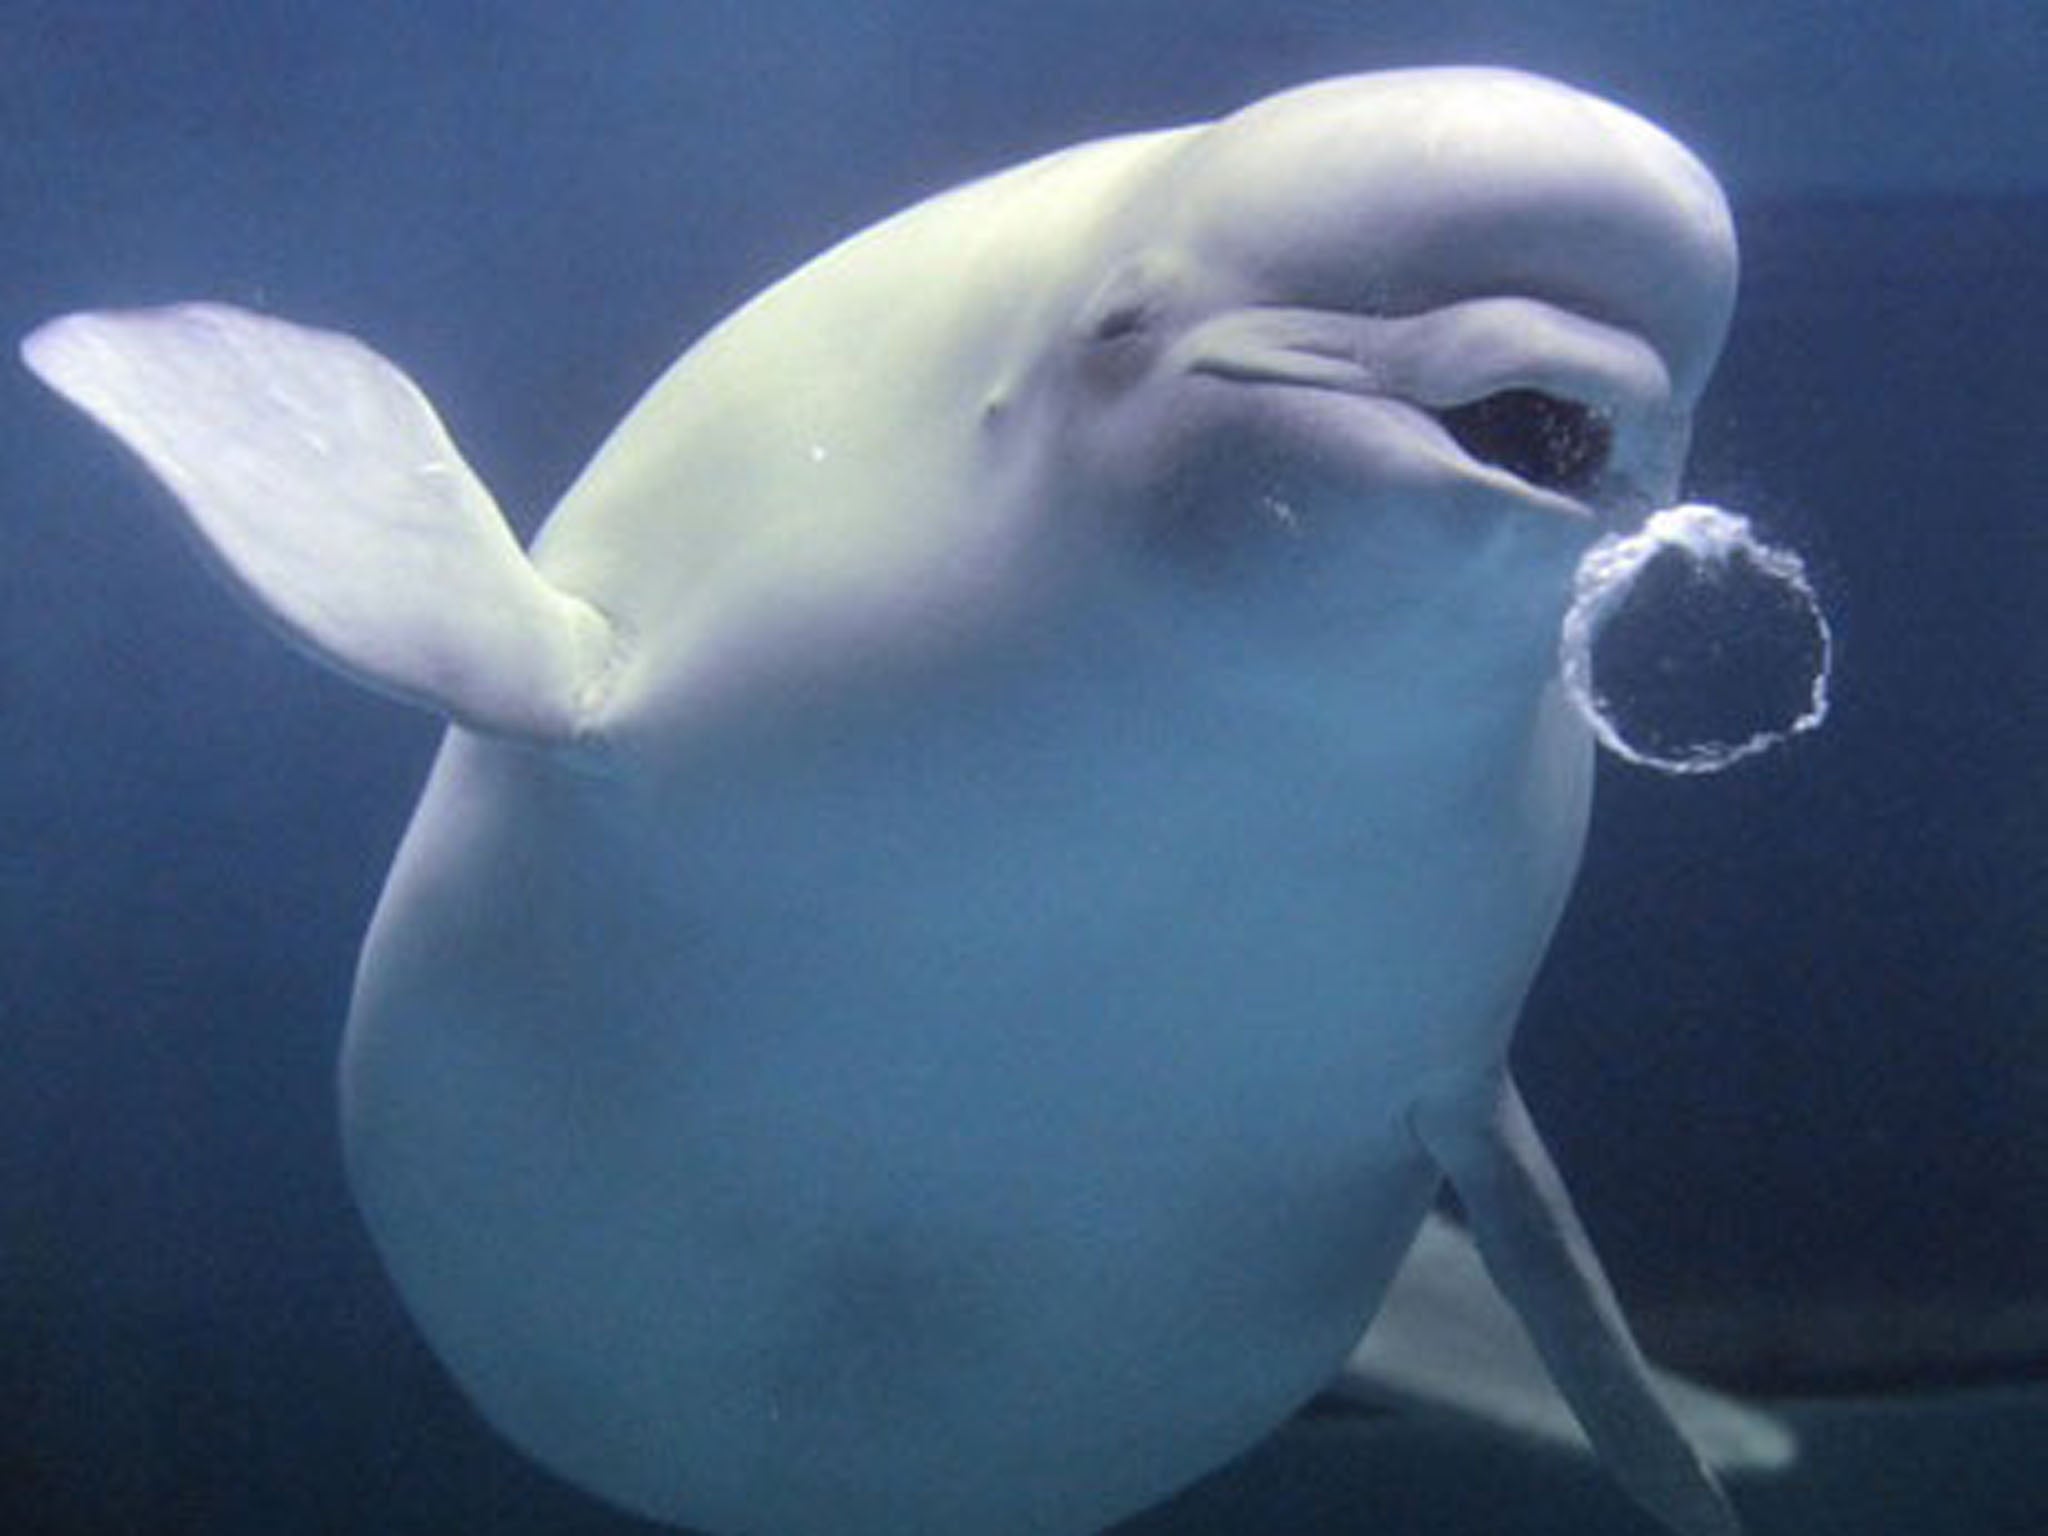 The Arctic beluga whales are thought to have been infected through water or fish that have been contaminated with cat faeces washed into the sea